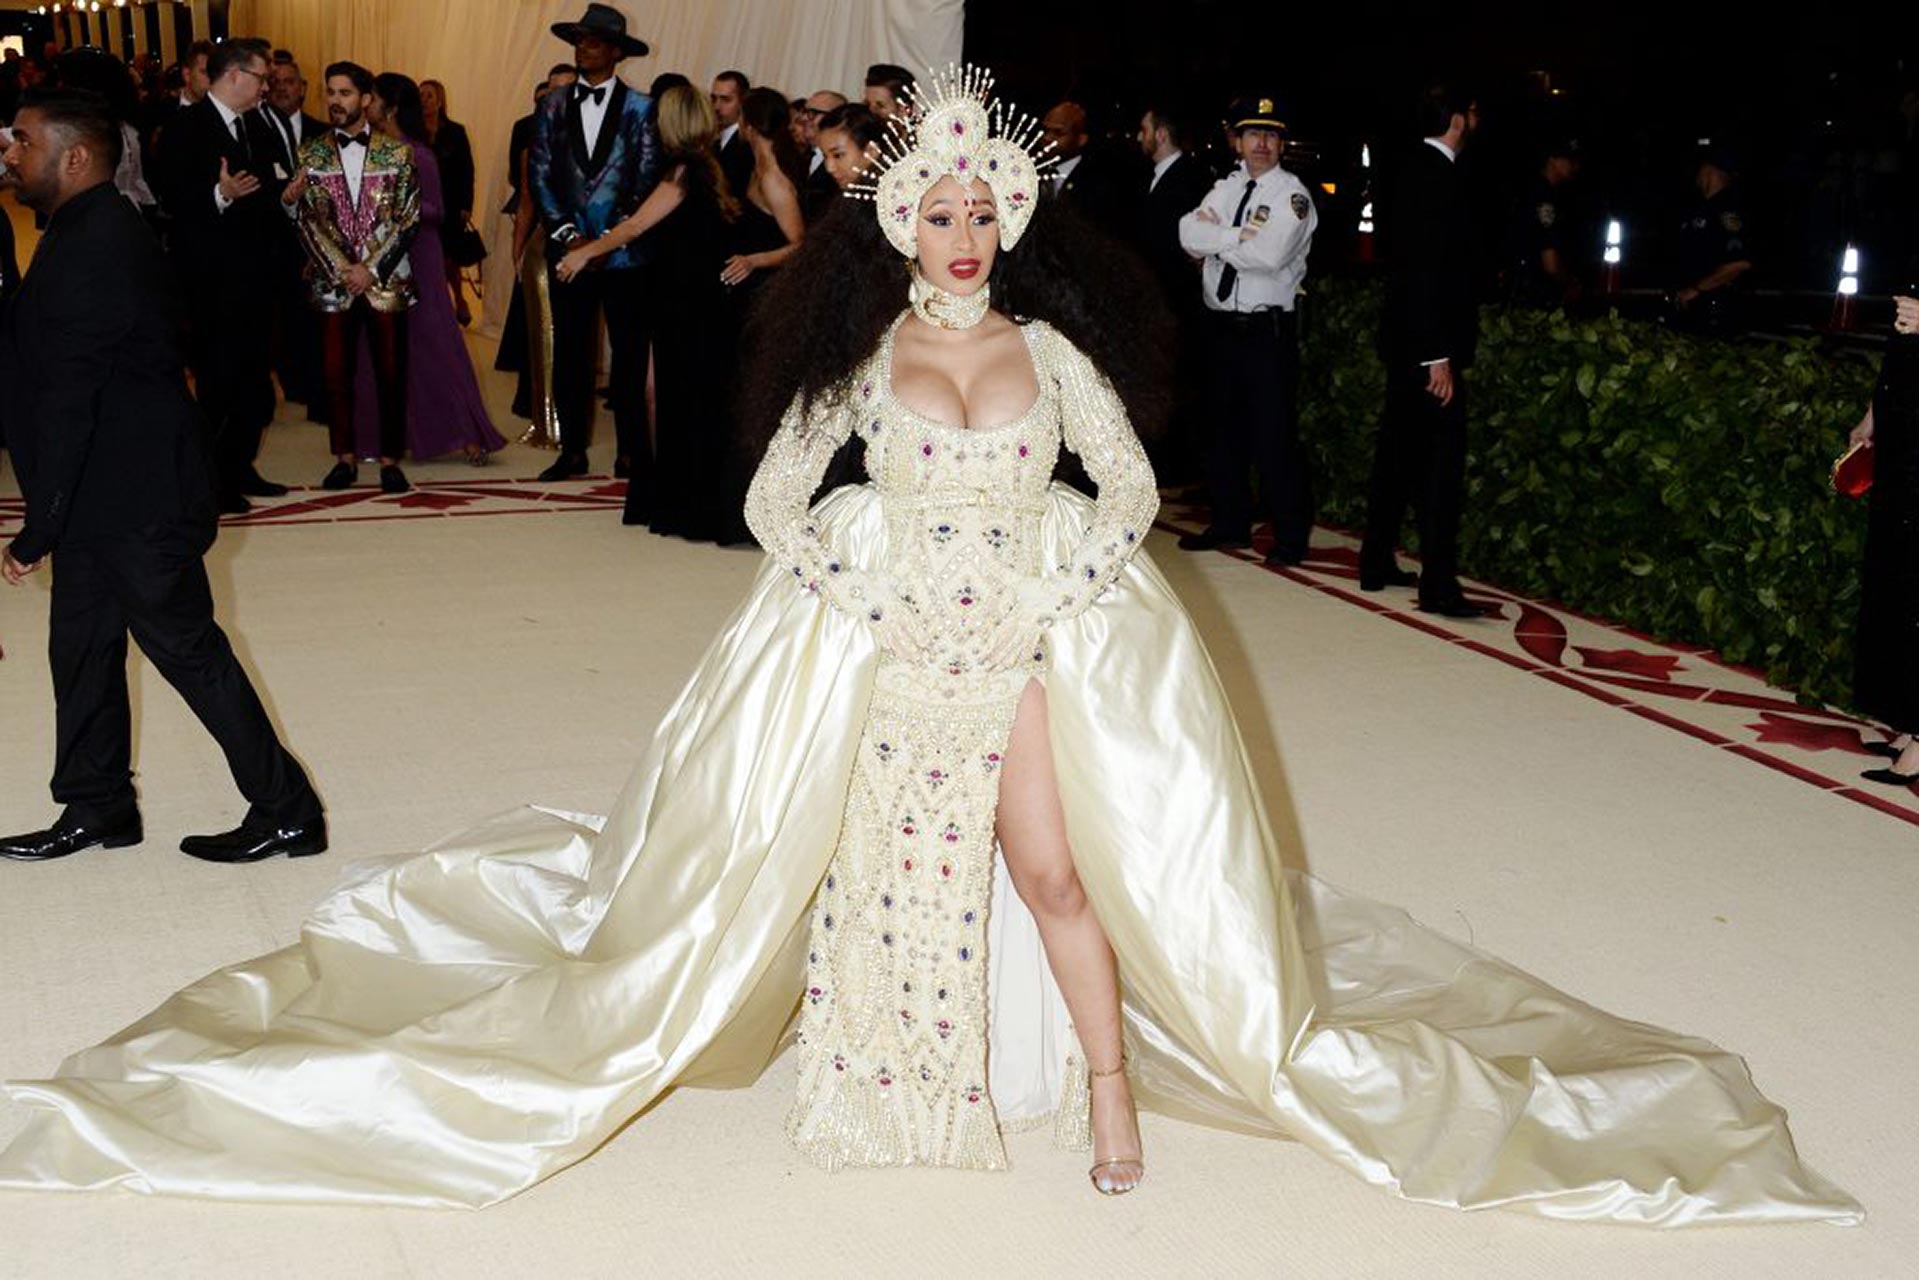 Cardi B Boobs Were Ready To Explode on MET Gala 2018 - Scandal Planet1919 x 1280